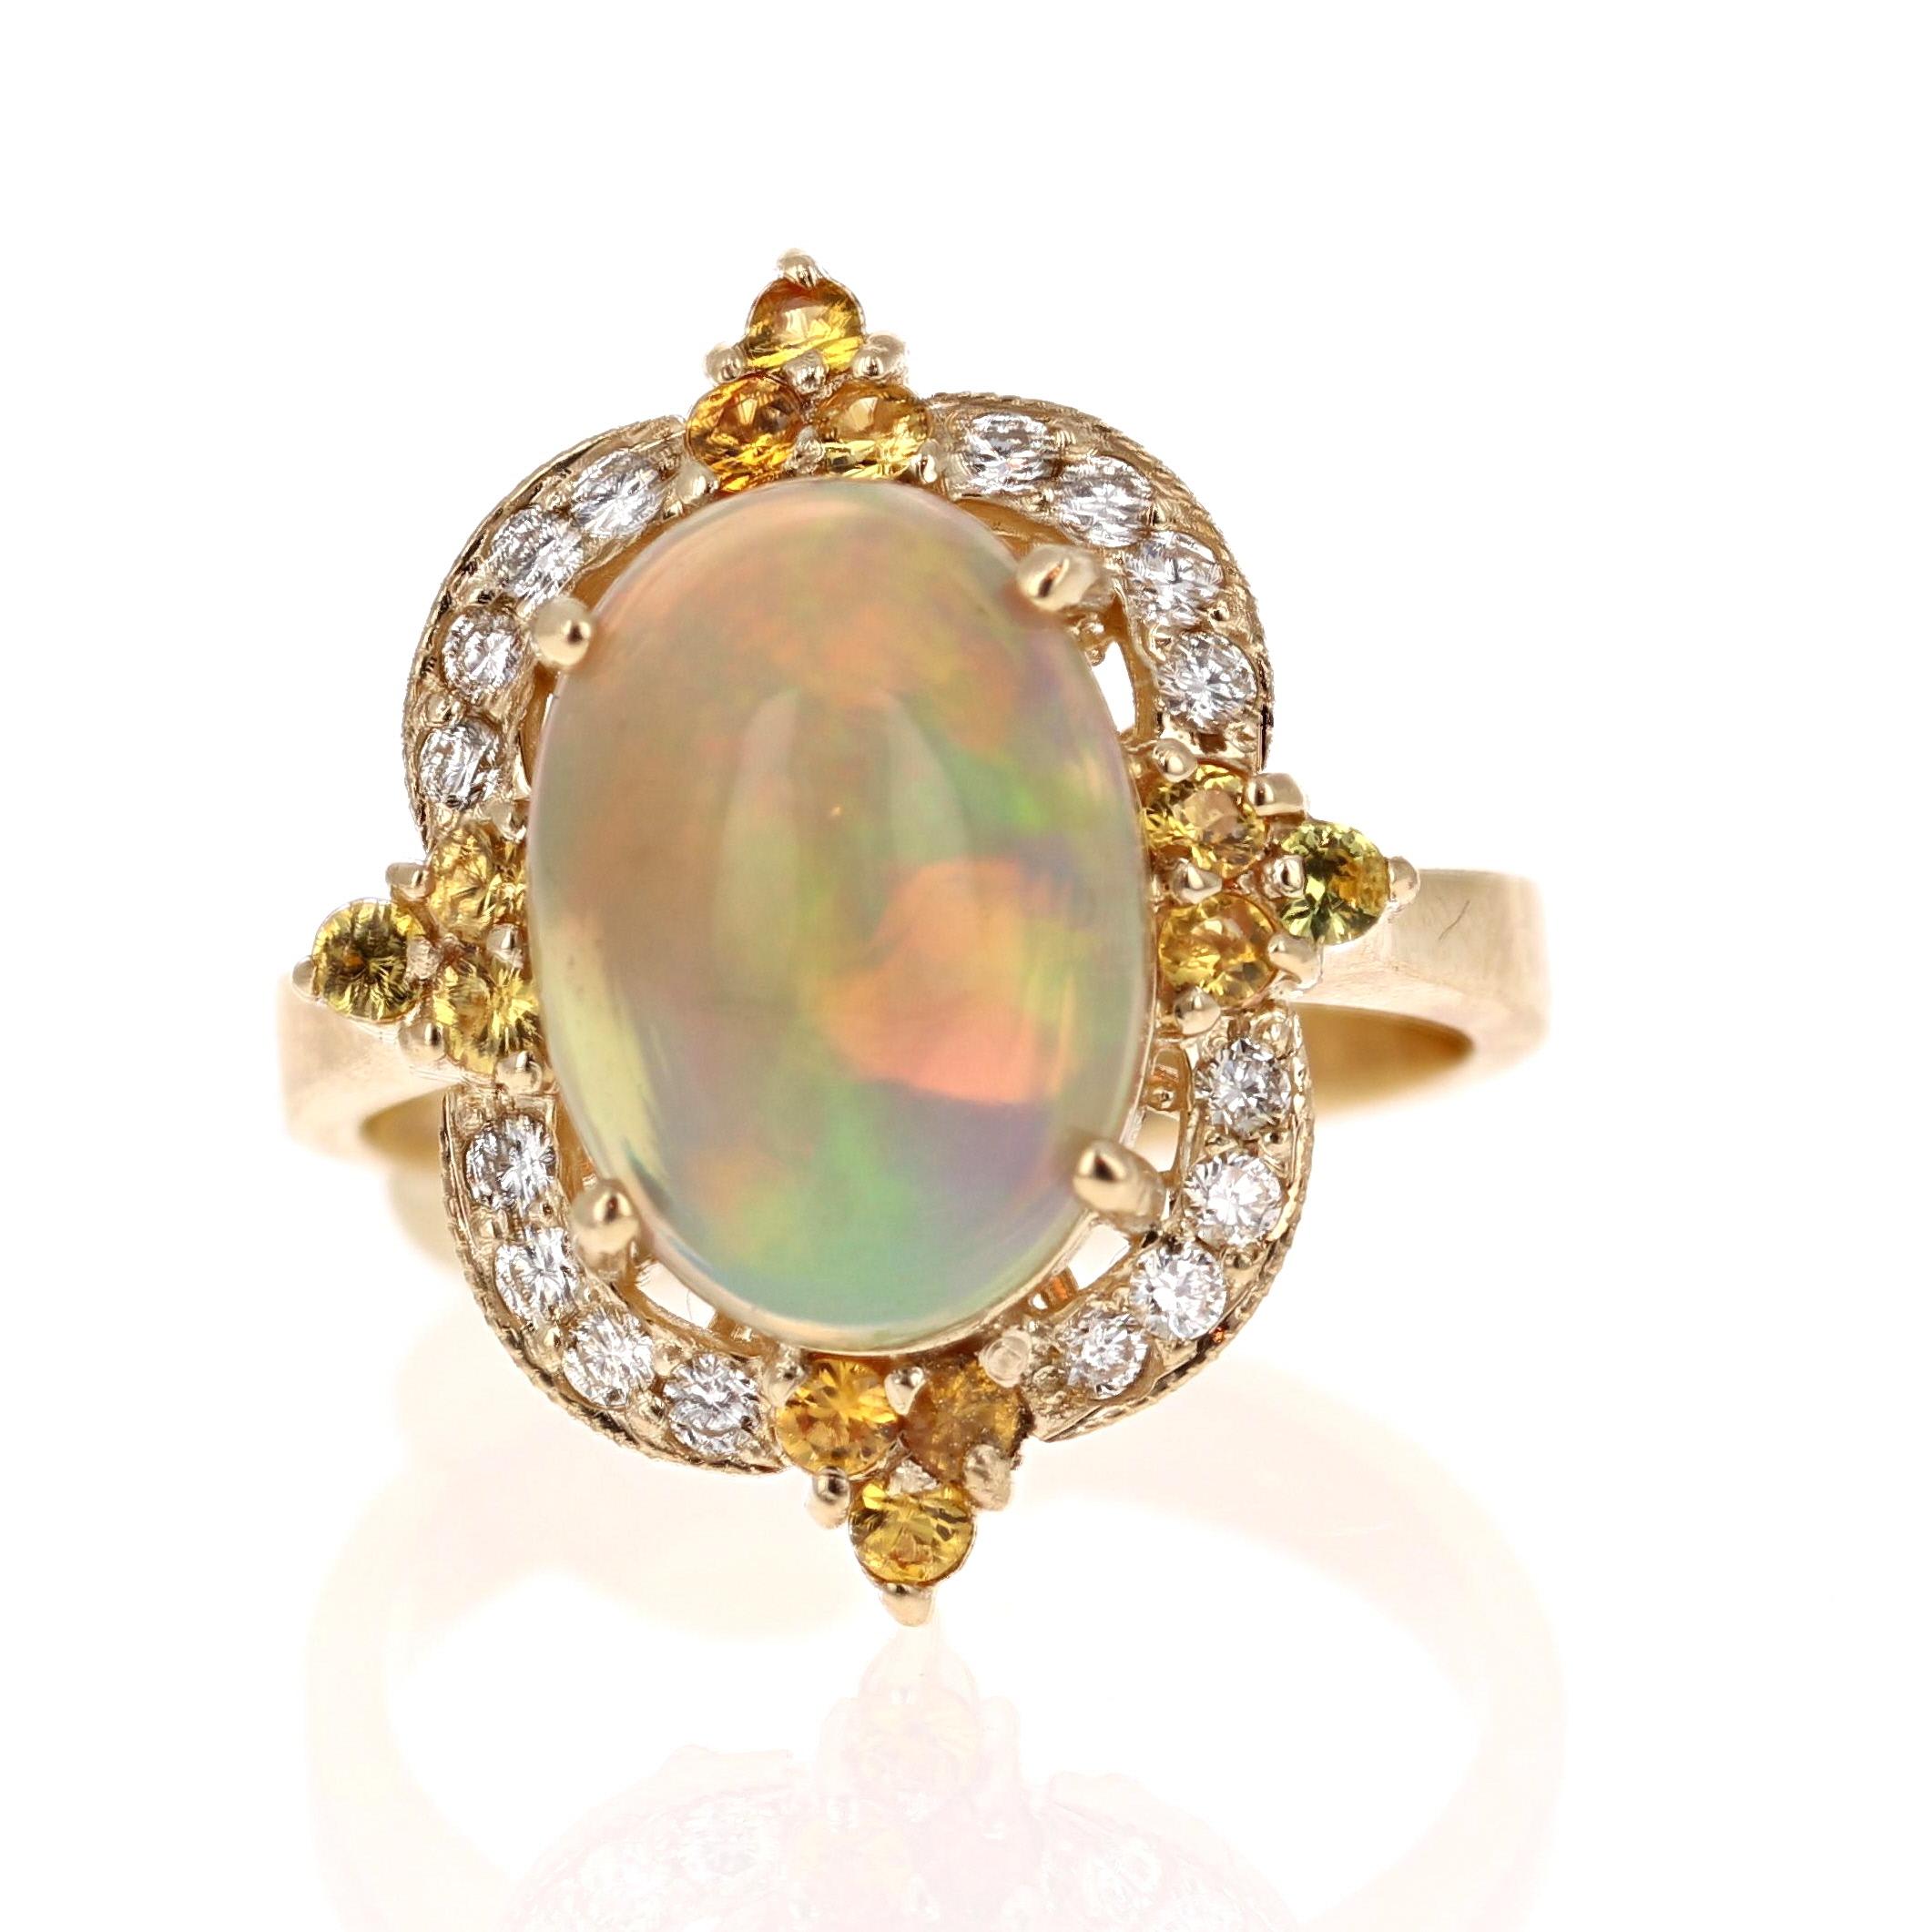 Opulent Opal, Yellow Sapphire and Diamond Ring in 14K Yellow Gold.

The beautiful Oval Cut, Ethiopian-Origin Opal with its striking flashes of color weighs 3.03 Carats. The Opal has flashes of color ranging from green, orange, yellow and red.   It